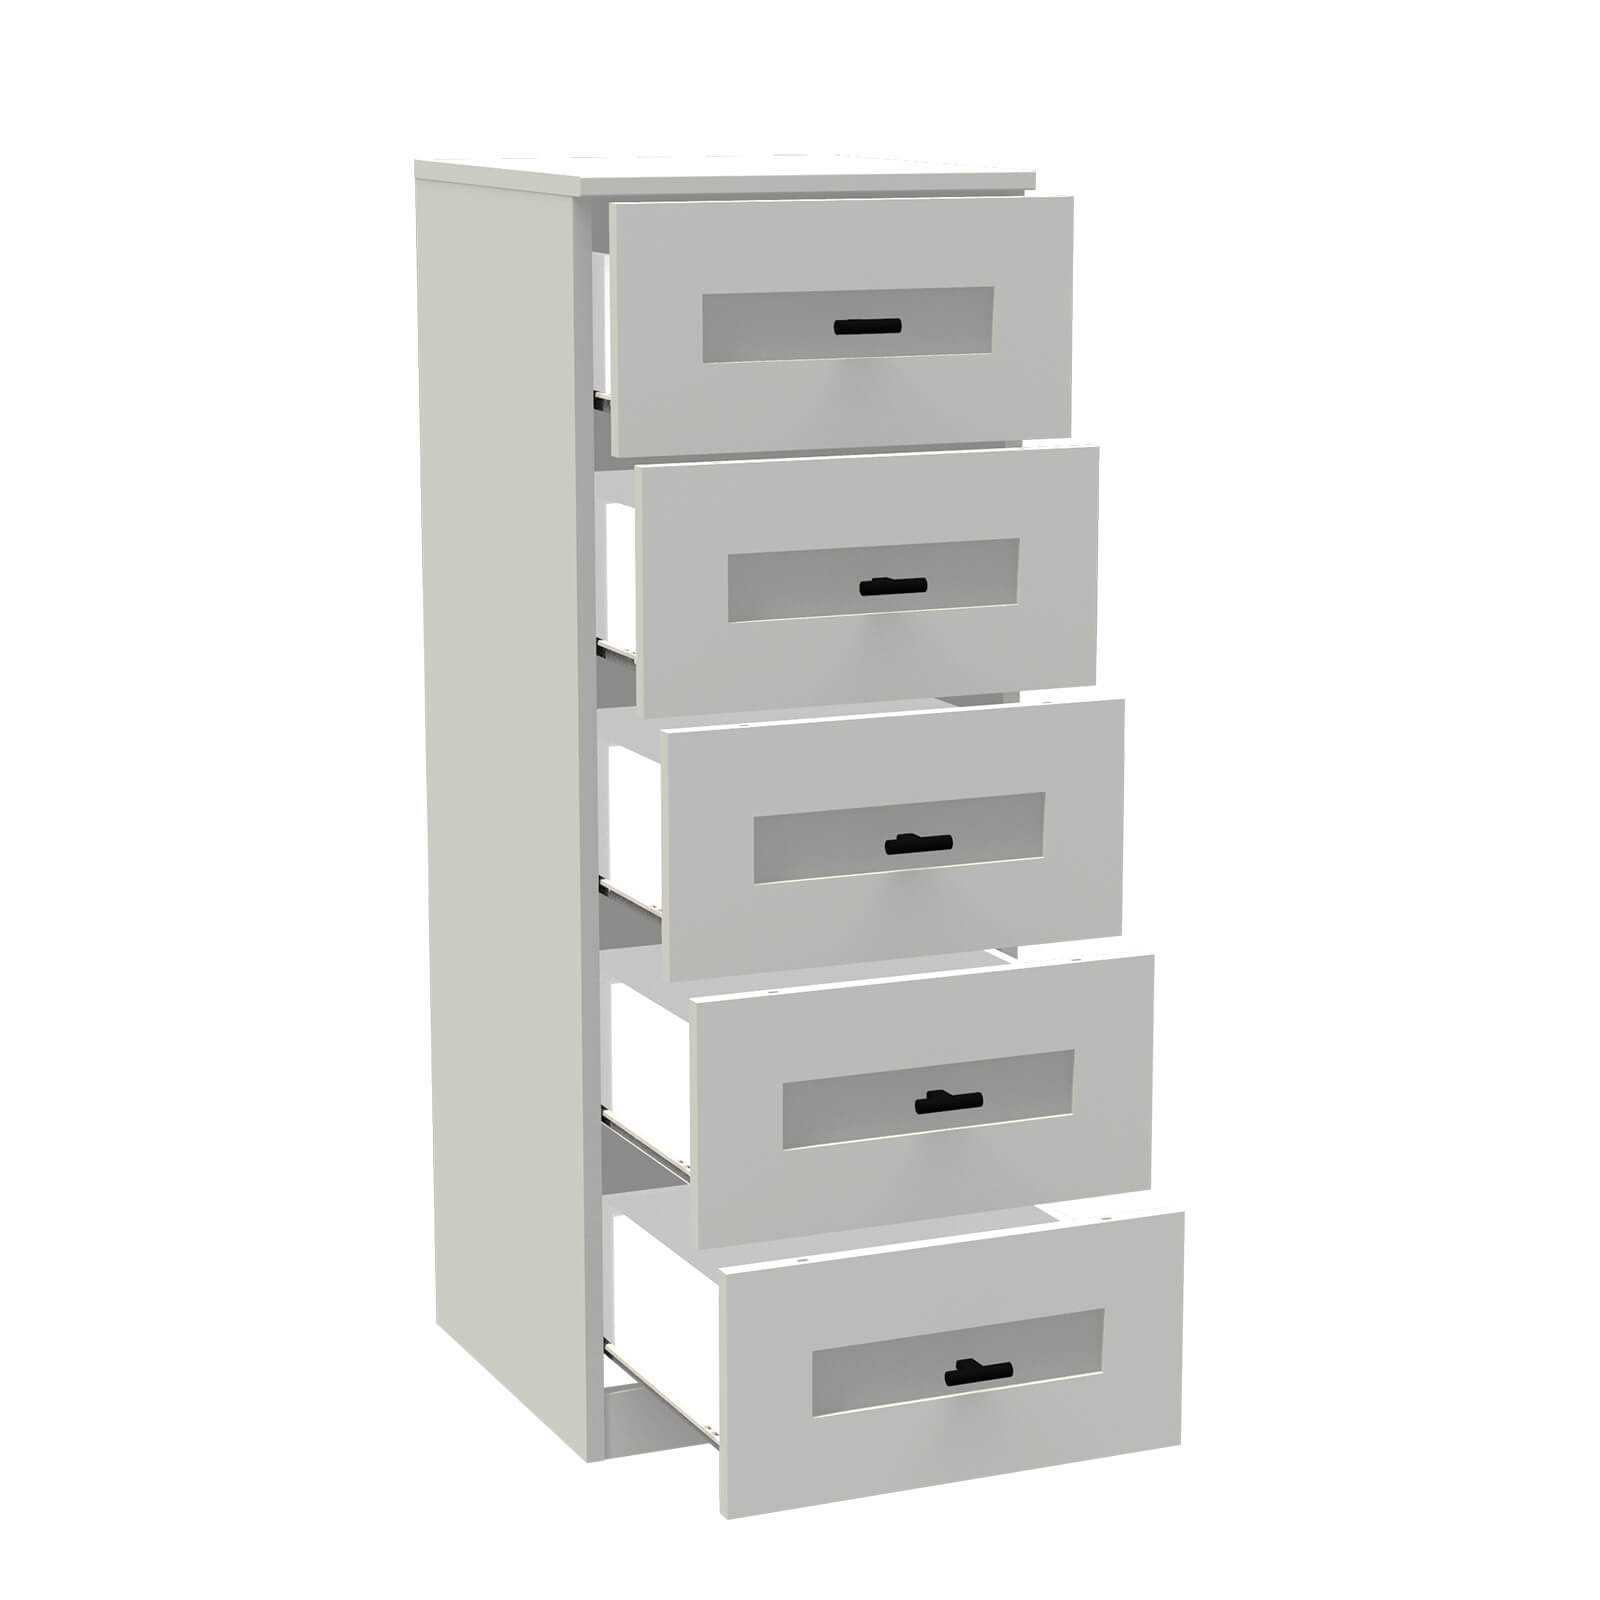 Fitted Bedroom Shaker 5 Drawer Chest - Grey